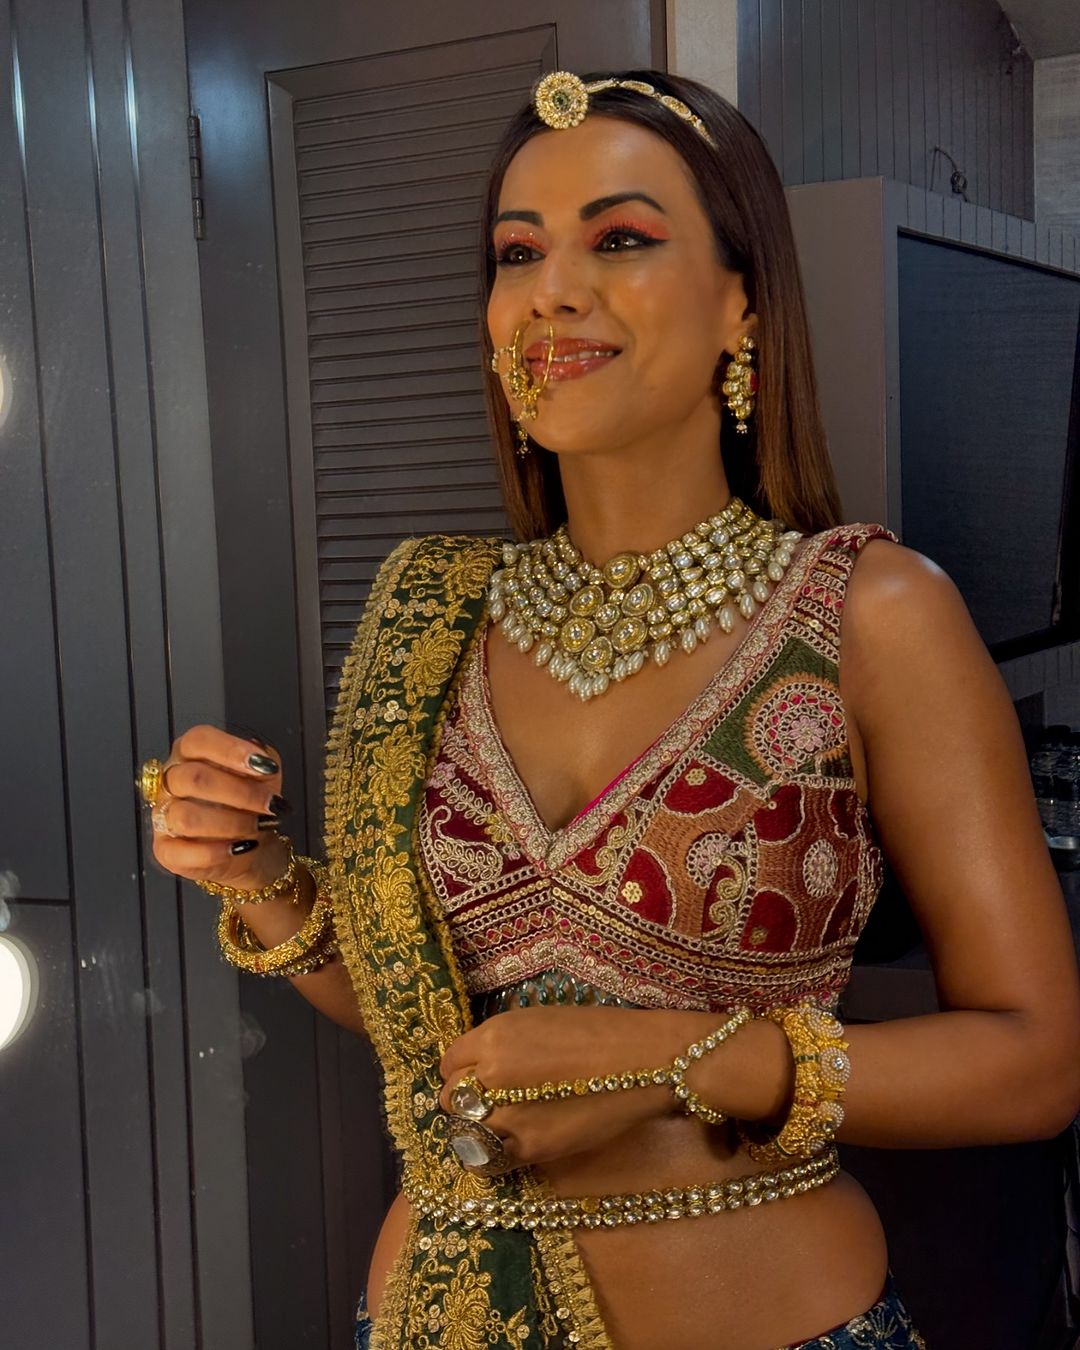 Naagin Fame Actress Nia Sharma Agrees With Digital Blooming That The Small Screen Faced The Brunt. See What This Beautiful Actress Added About It!